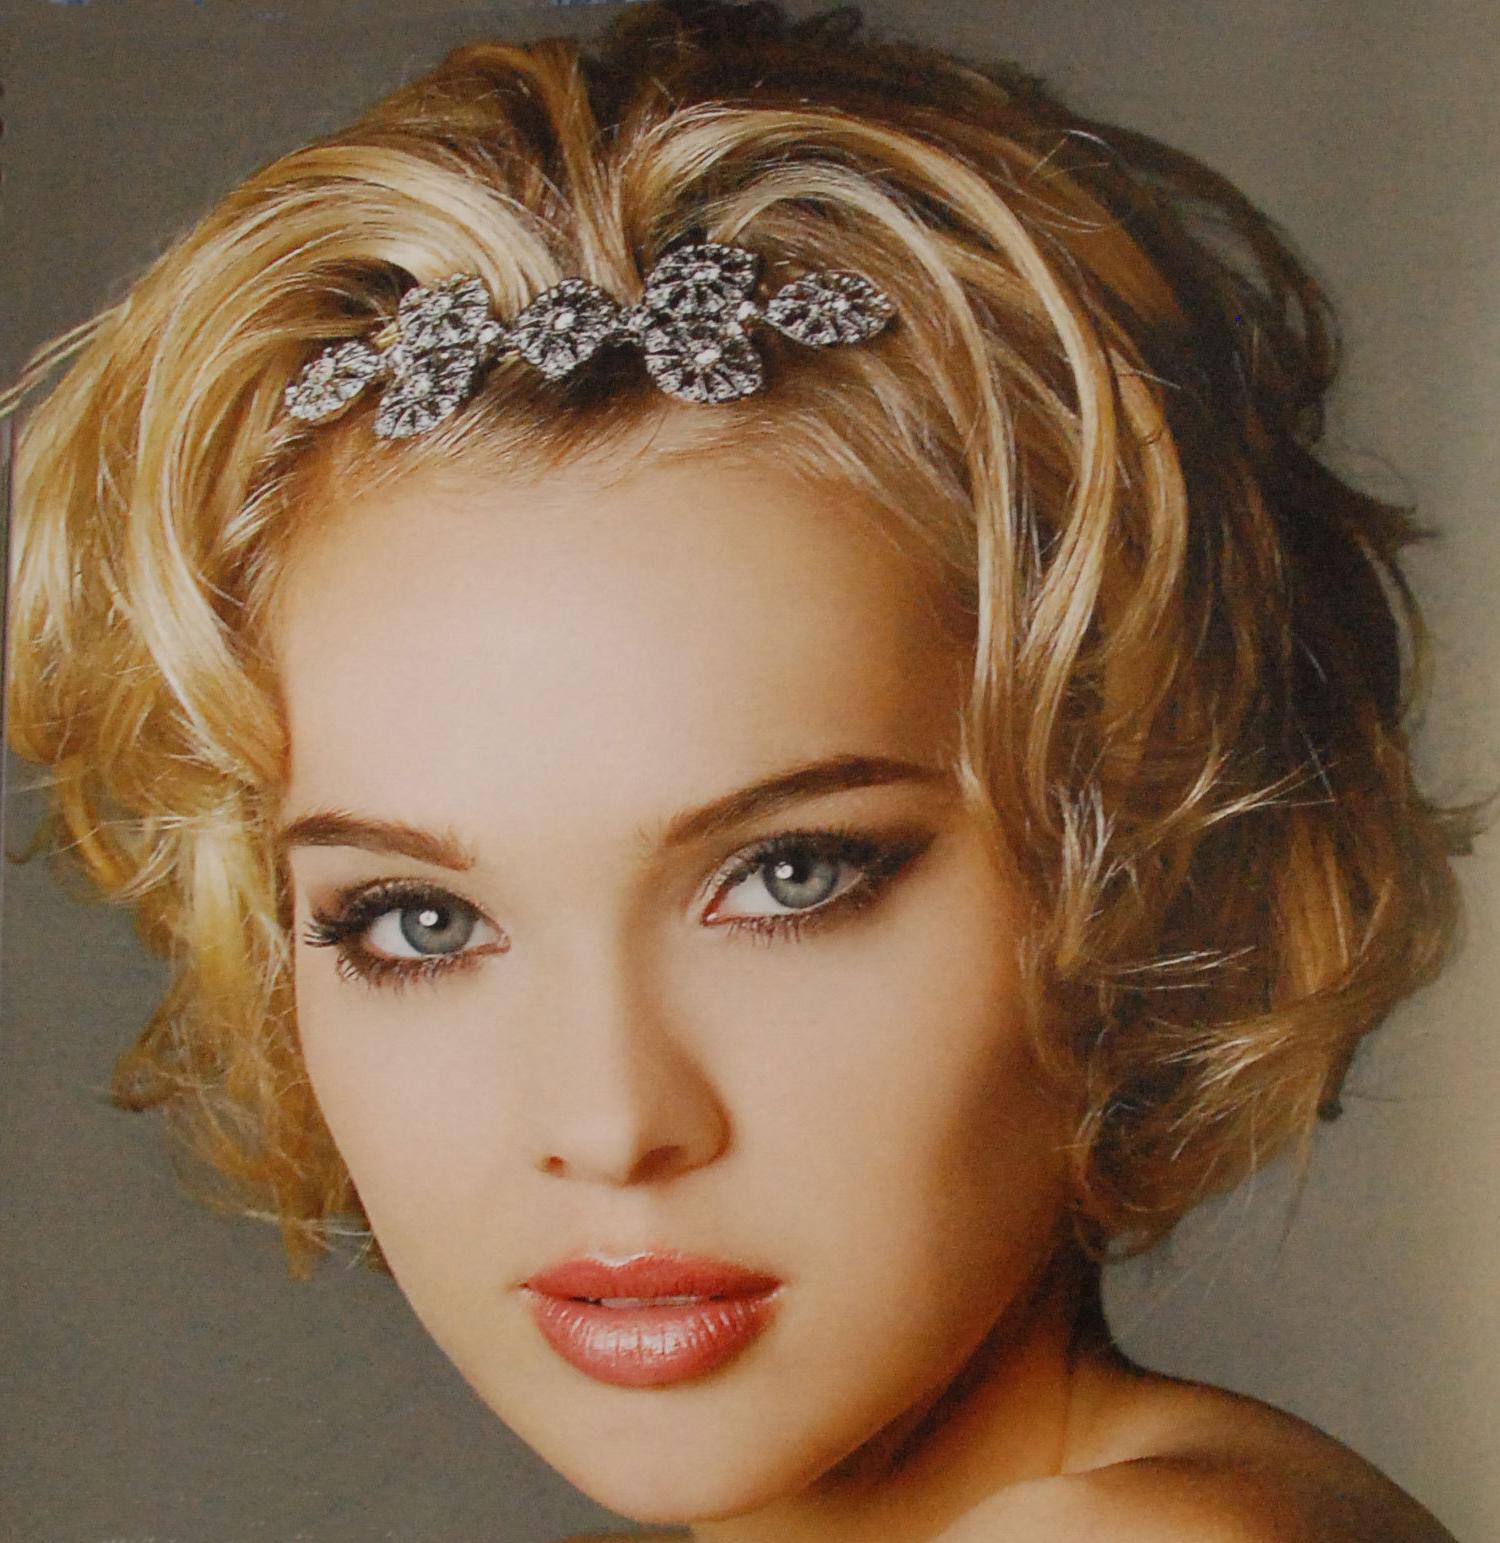 Chic Hairstyles for Short Hair